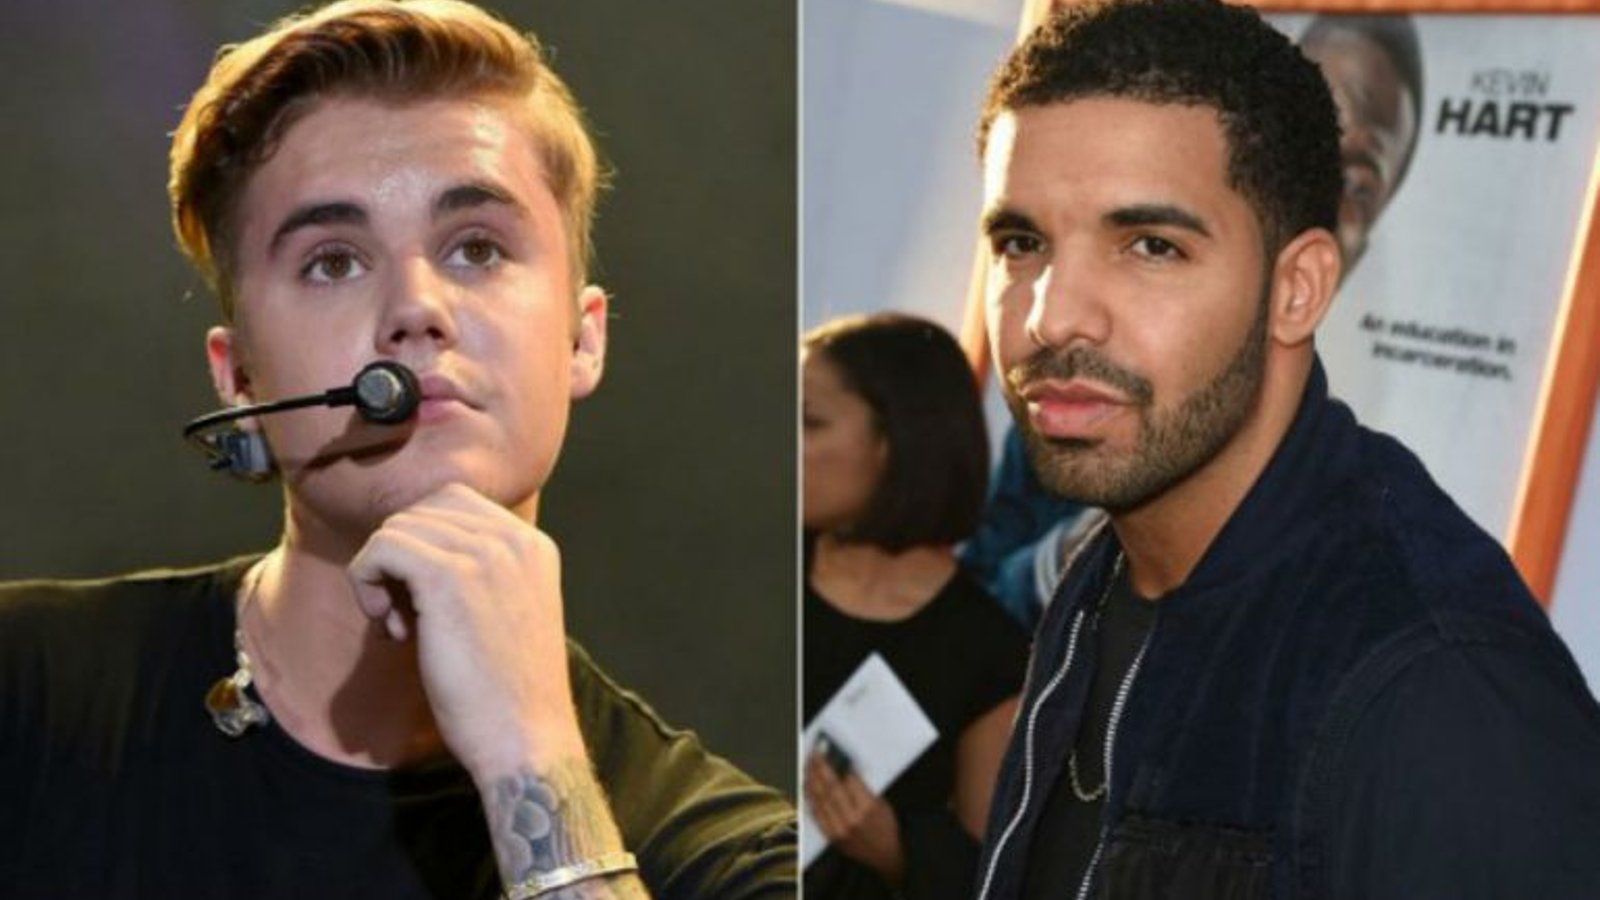 Drake upset with Bieber playing hockey with the Leafs 